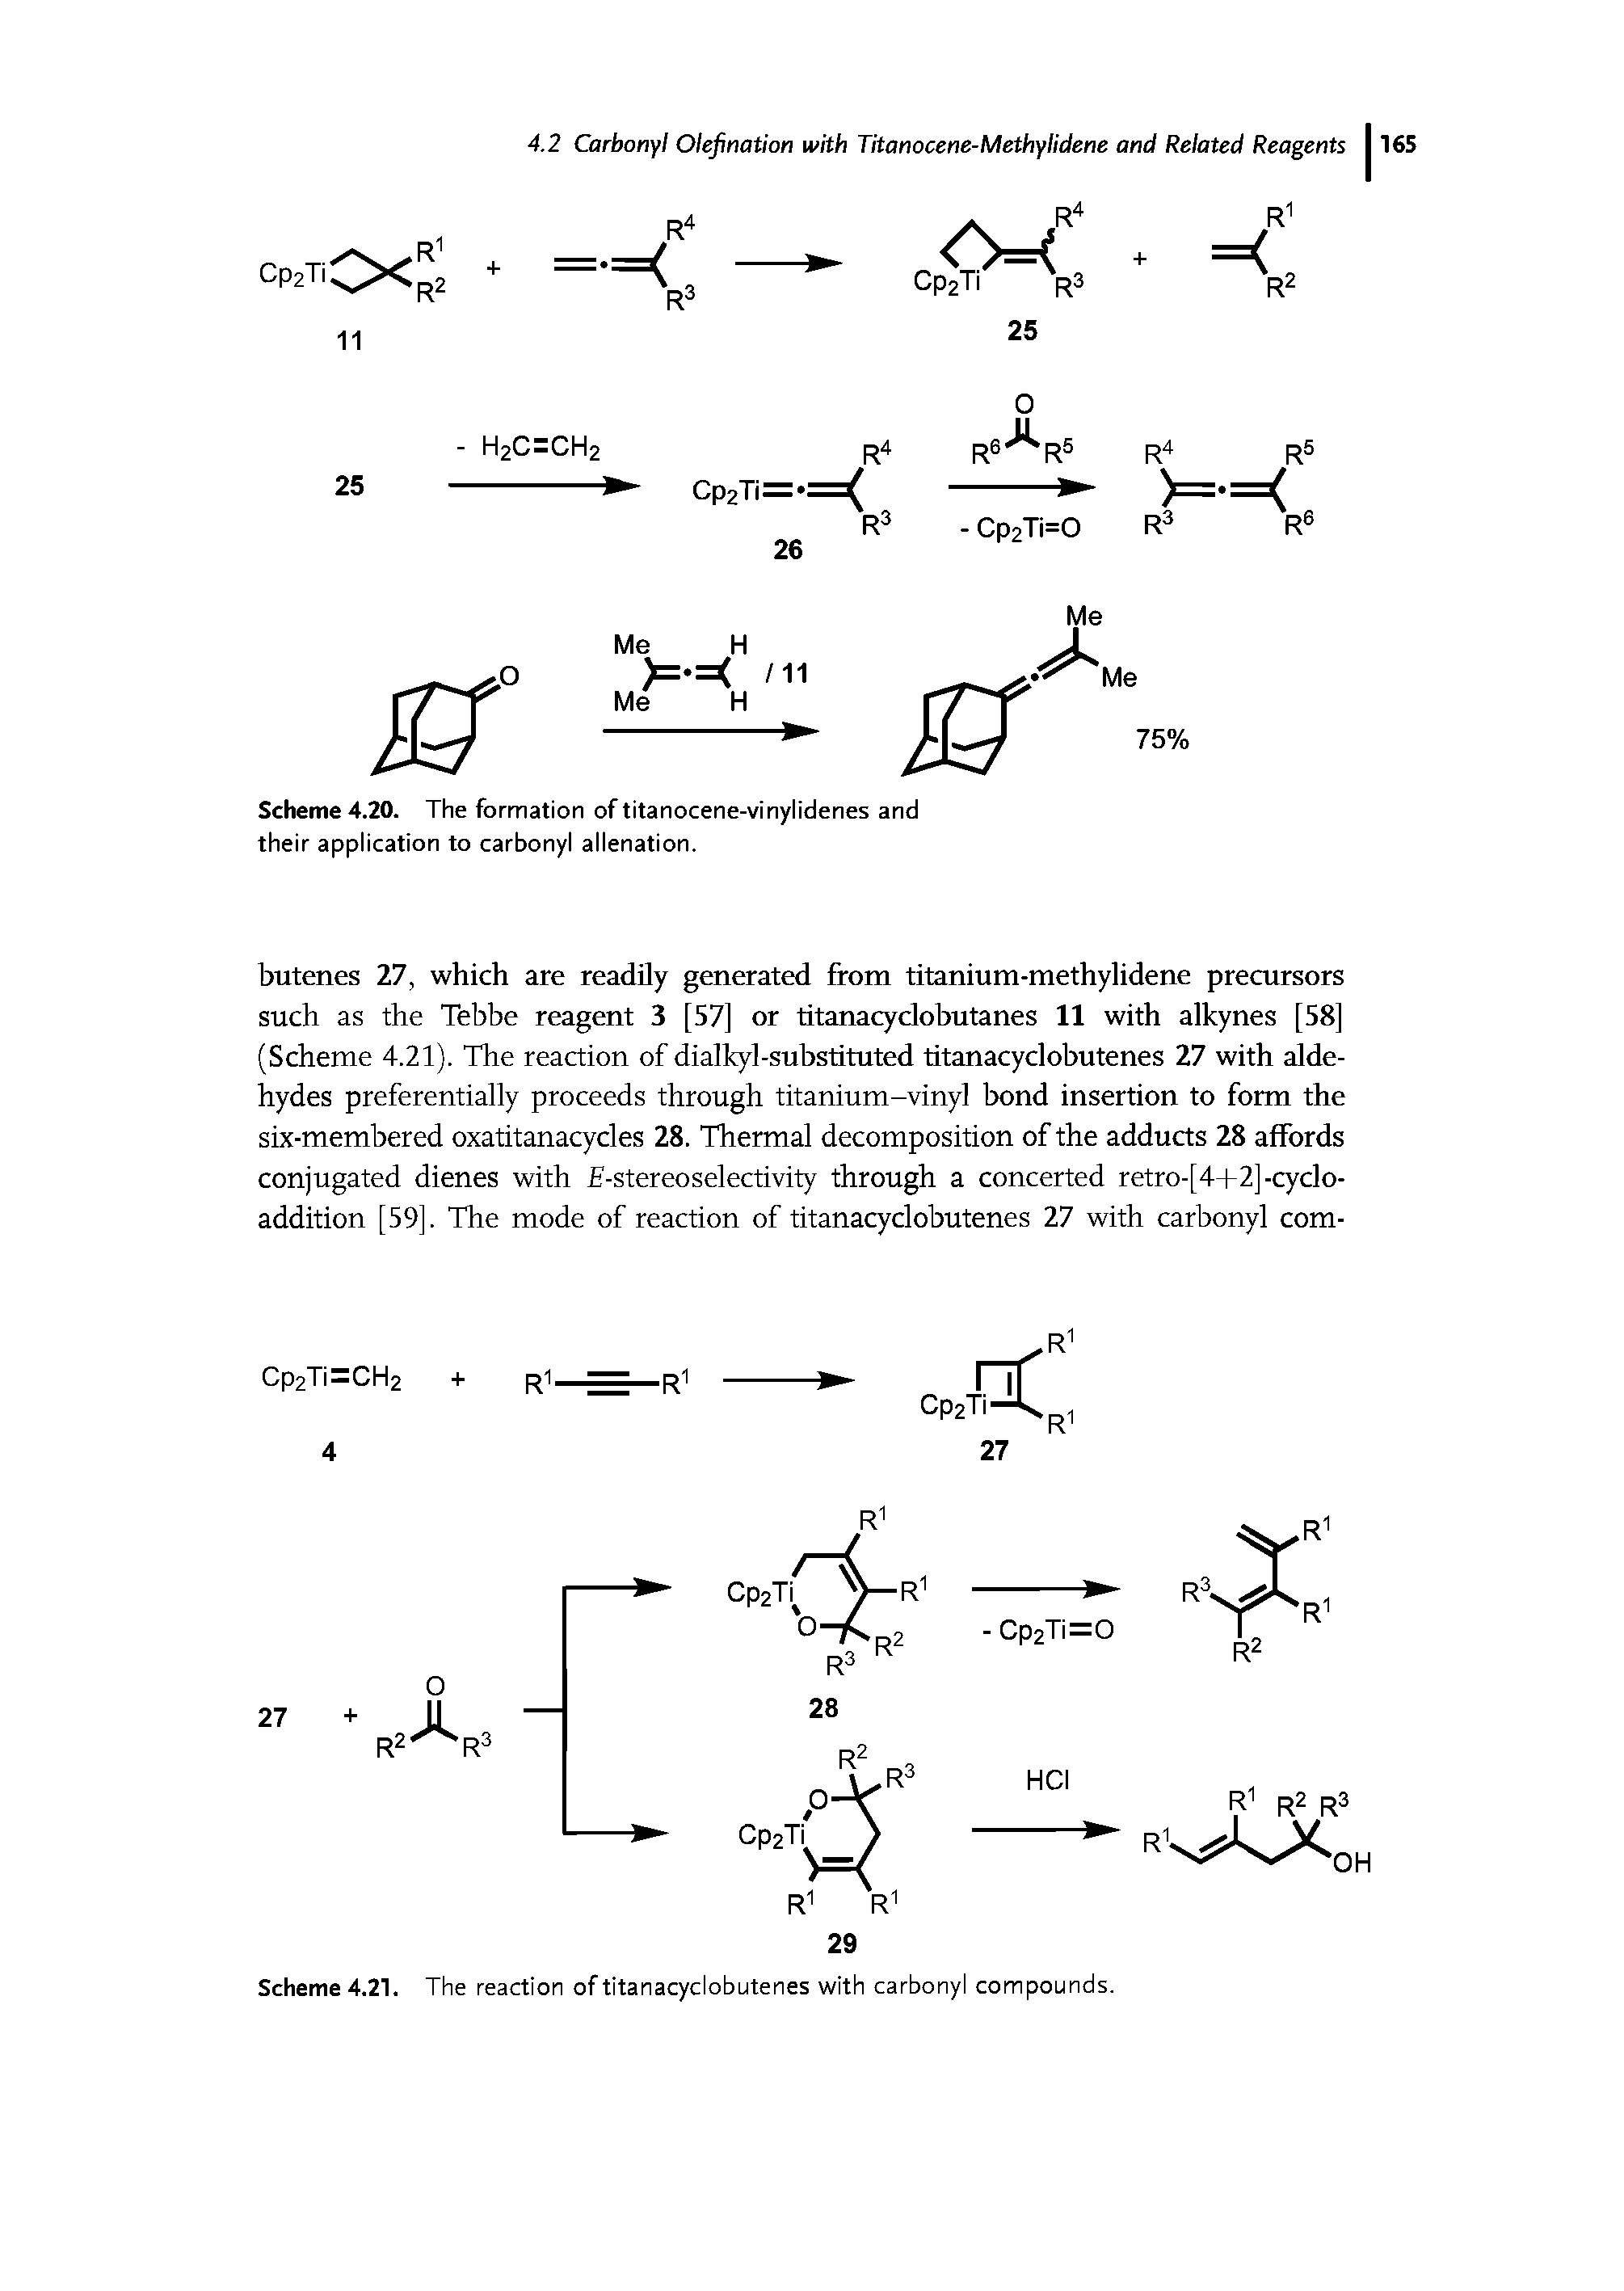 Scheme 4.20. The formation of titanocene-vinylidenes and their application to carbonyl alienation.